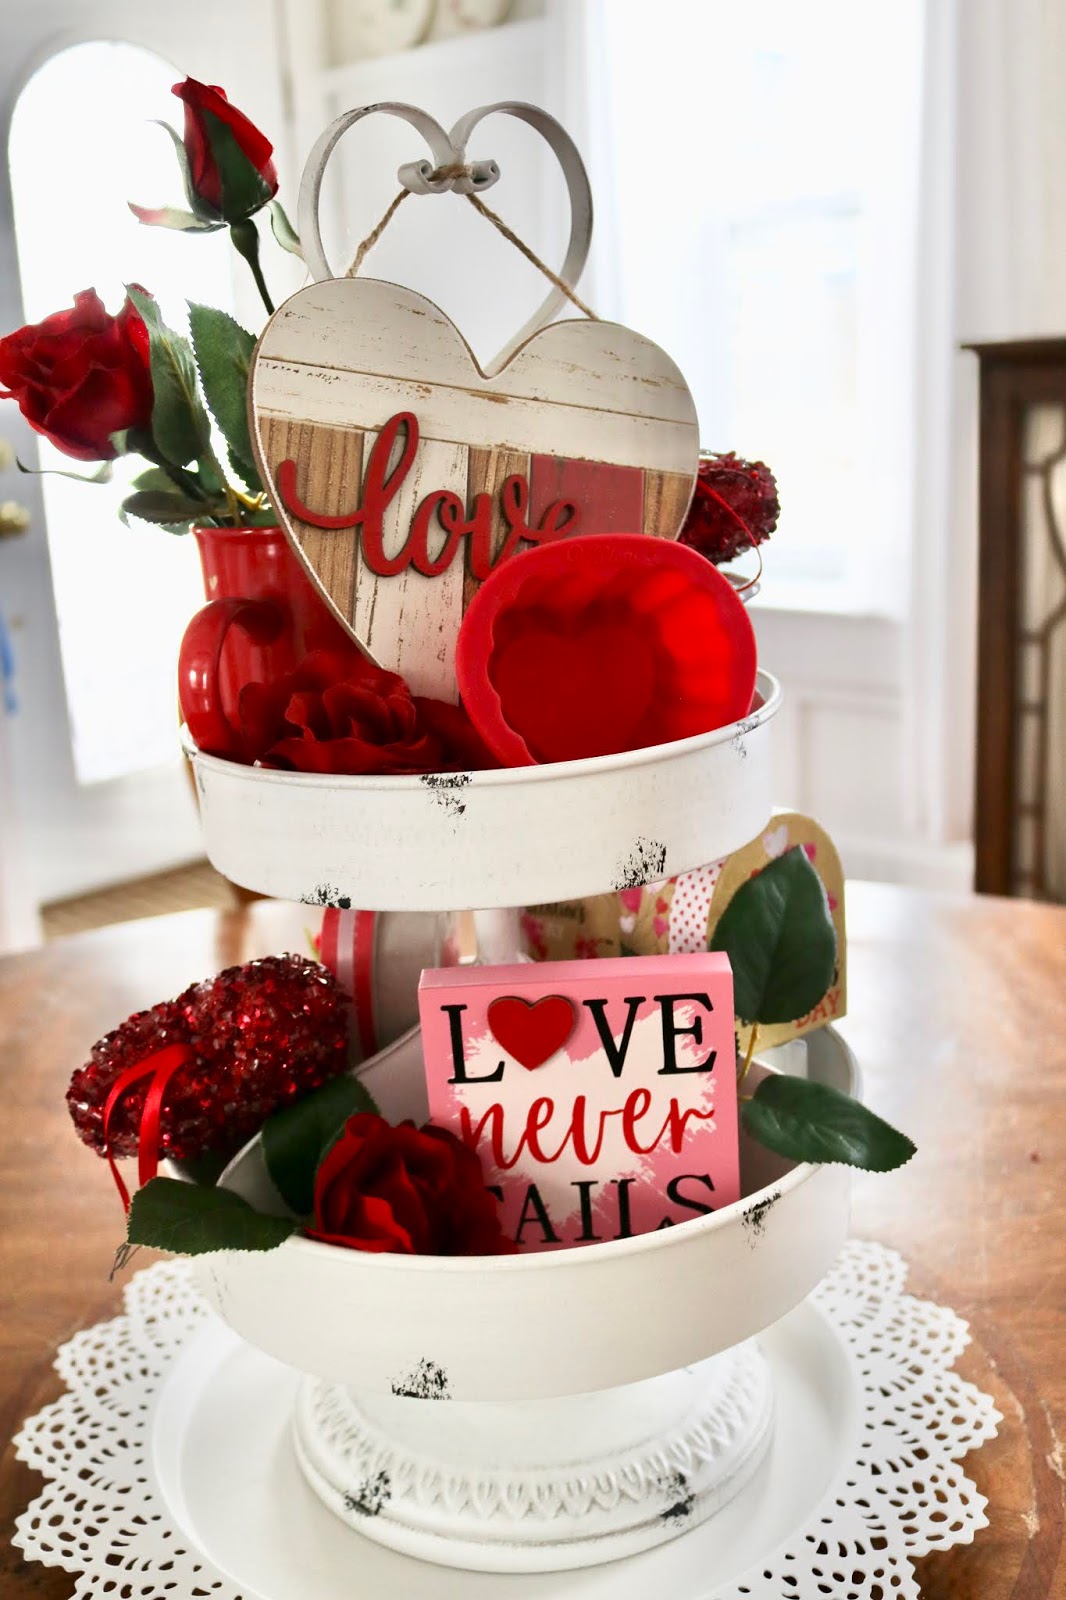 Amy's Creative Pursuits: A Tiered Tray Decorated For Valentines Day